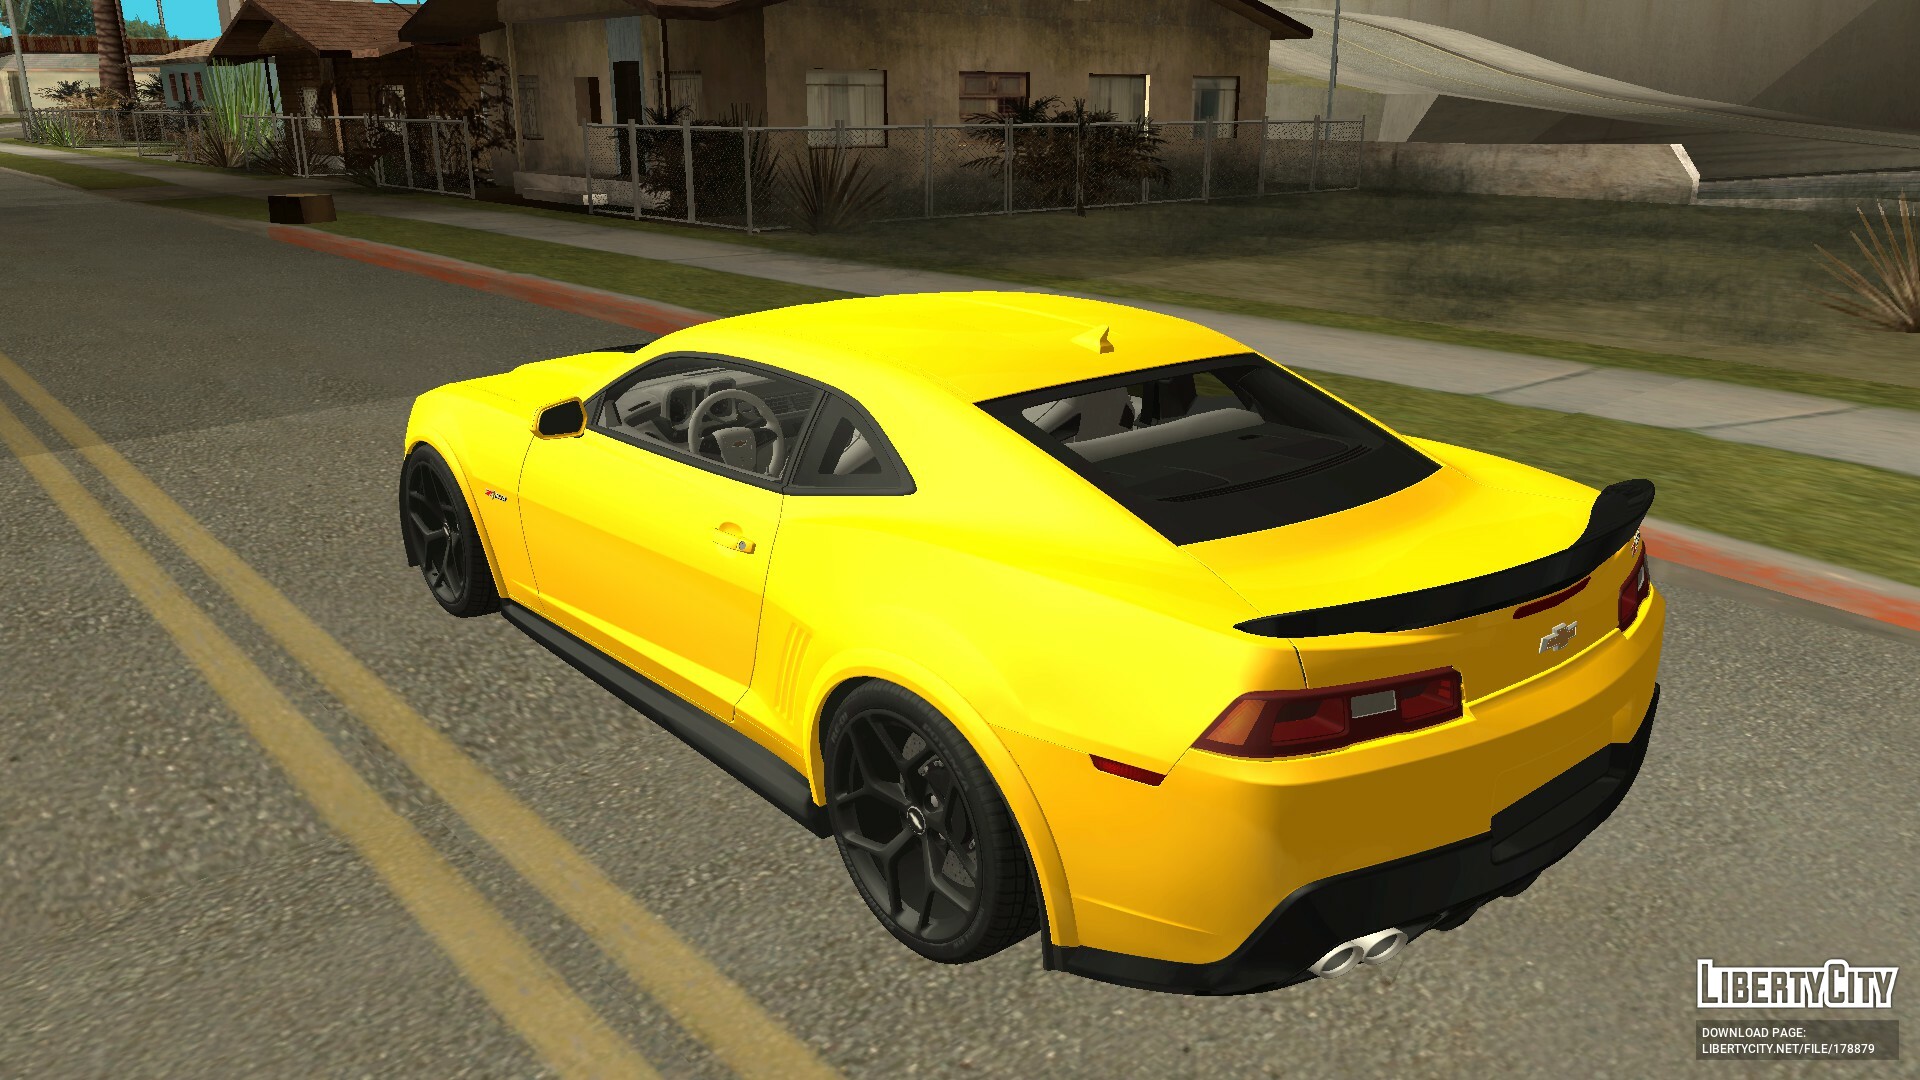 Is there camaro in gta 5 фото 56